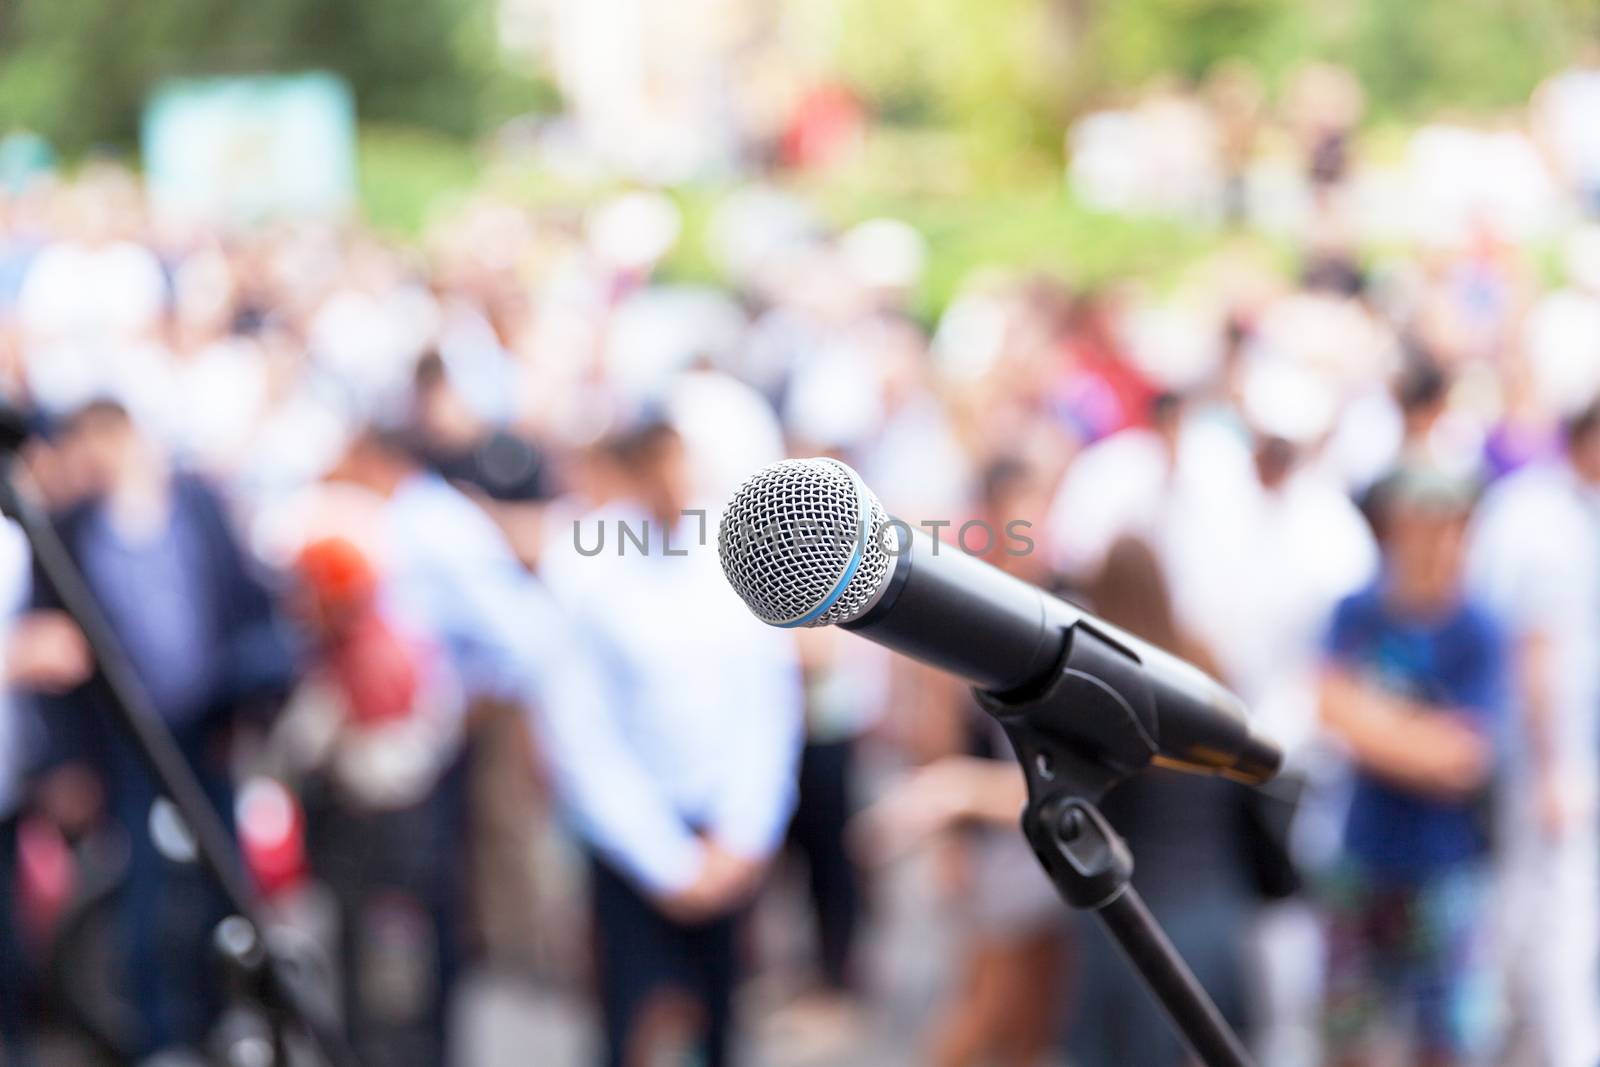 Microphone in focus against blurred audience. Protest. Public demonstration.